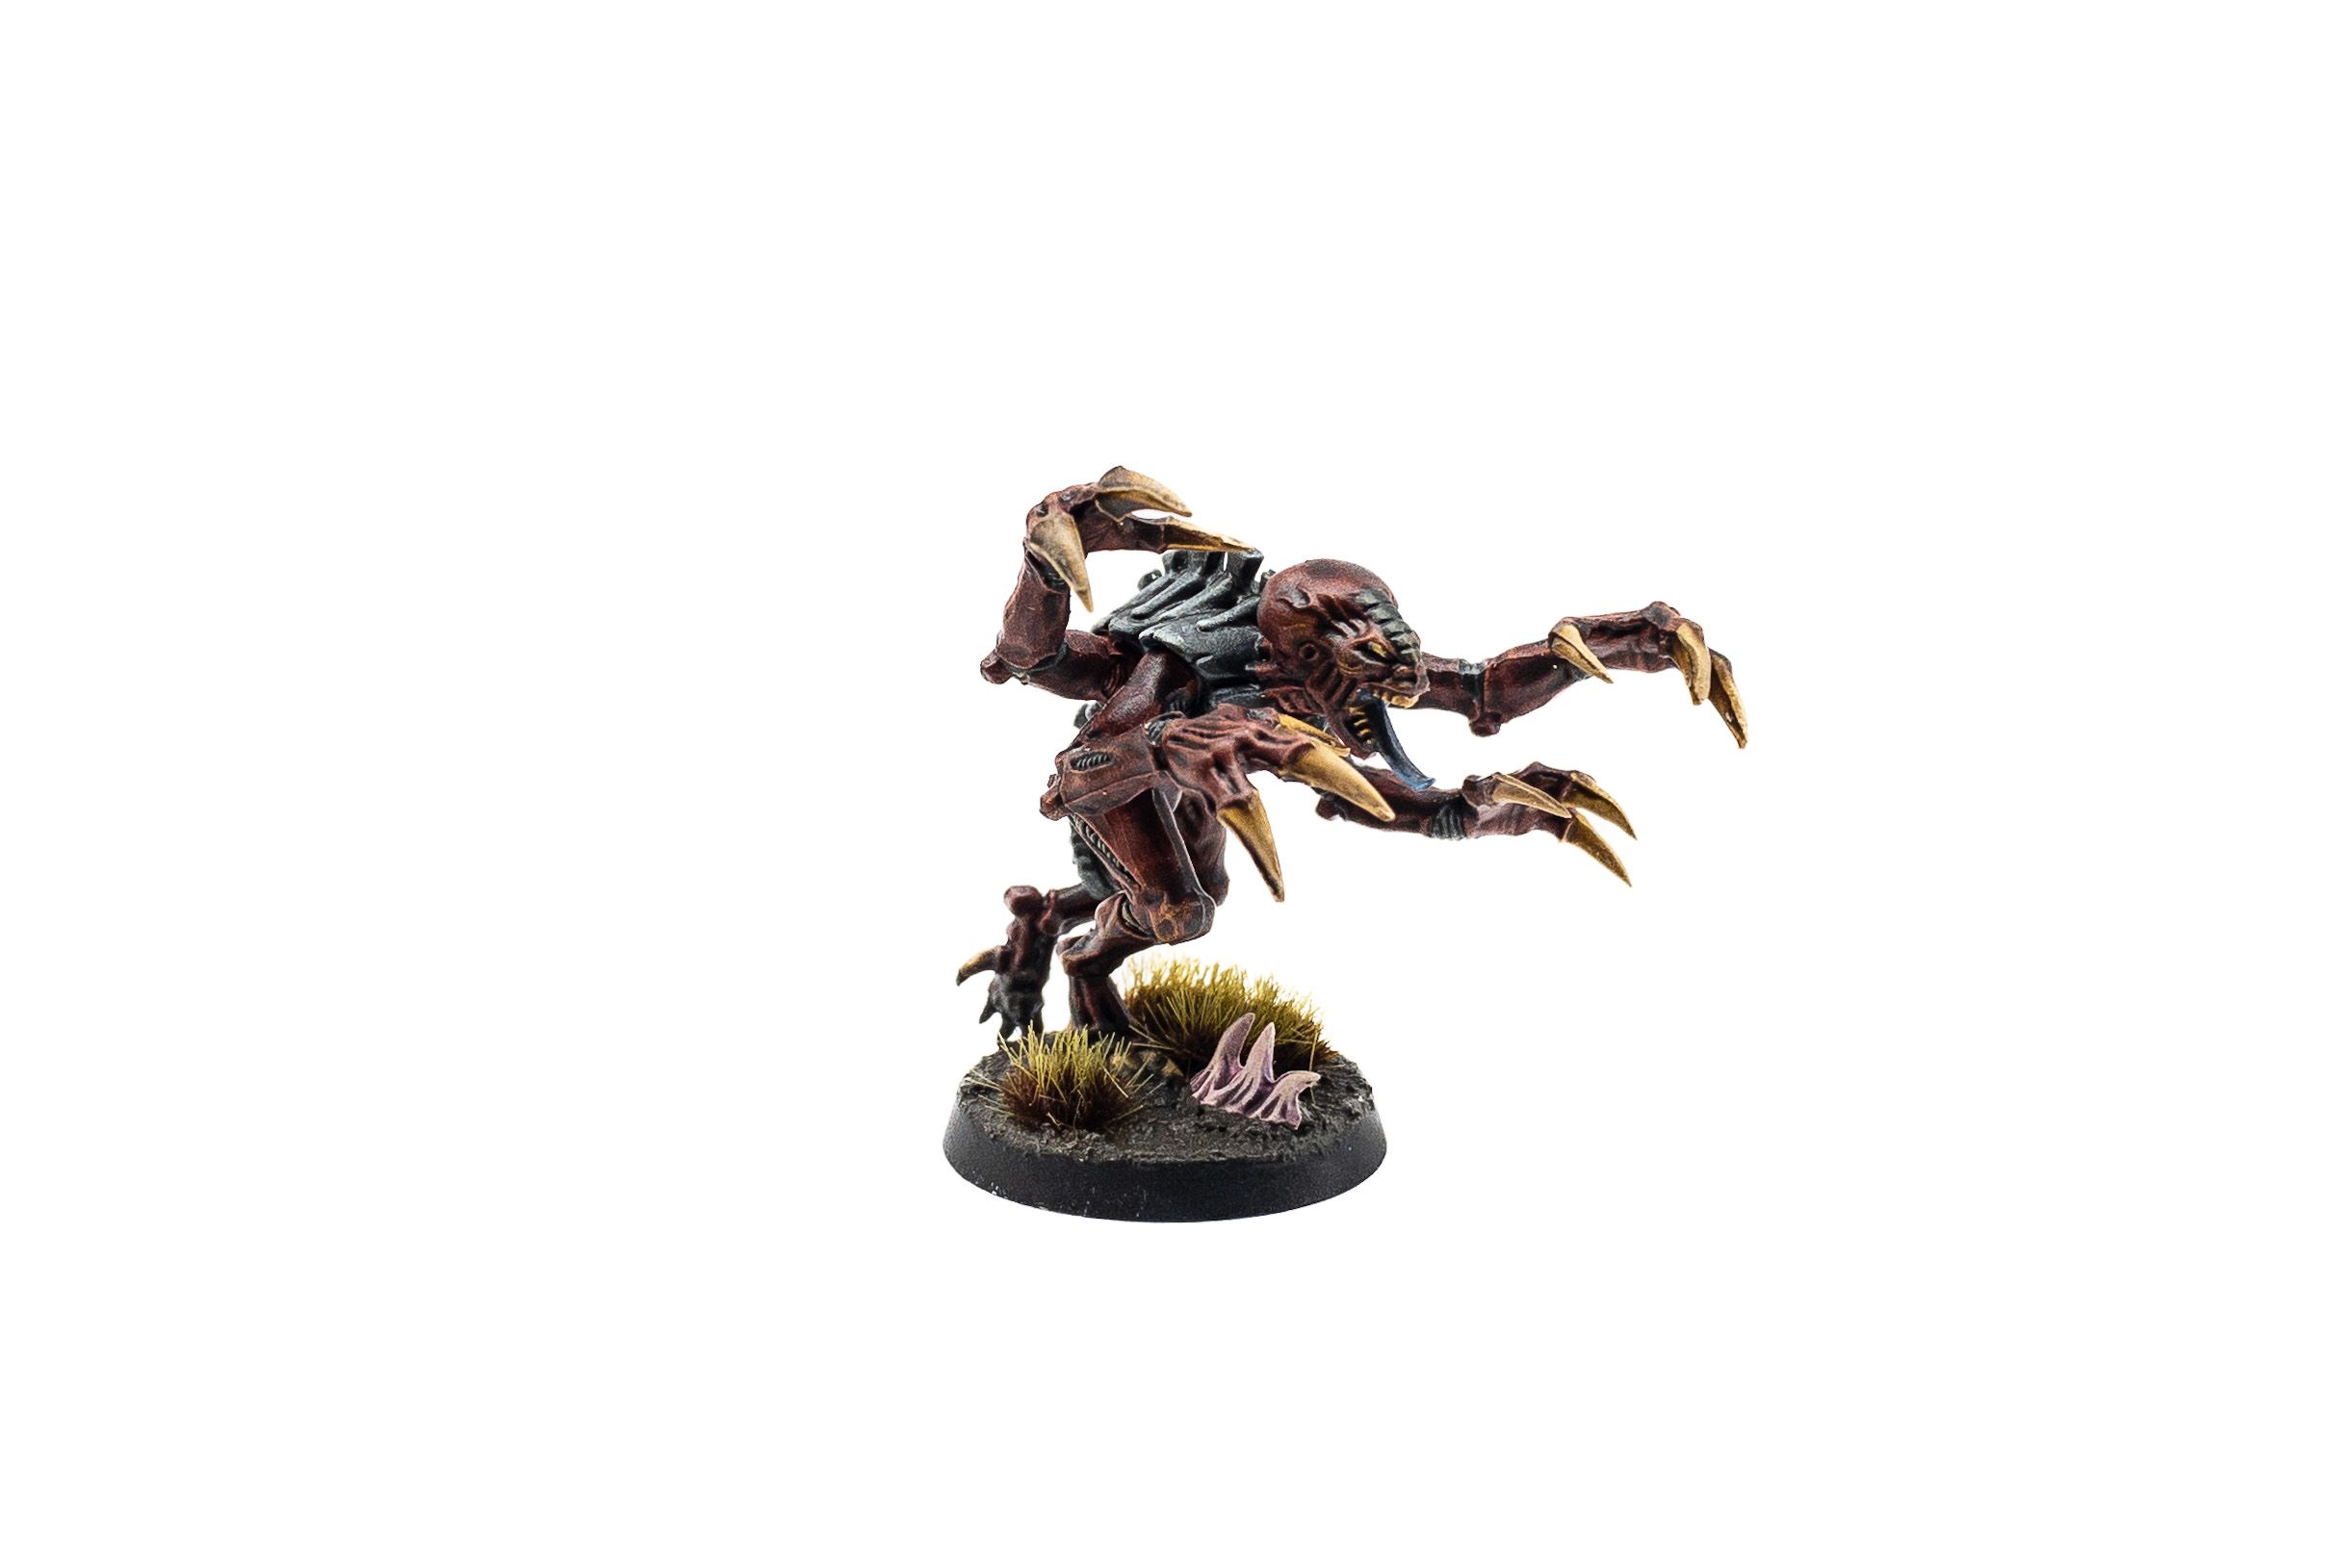 A photo of a Tyranid Genestealer. It's an Alien-esque creature with a long tongue and four arms with huge claws on it. Its skin is dark red and it's got a black carapace and all four arms have hands with huge yellow claws on them. The base looks like muddy ground with small swampy-looking grasses on it.